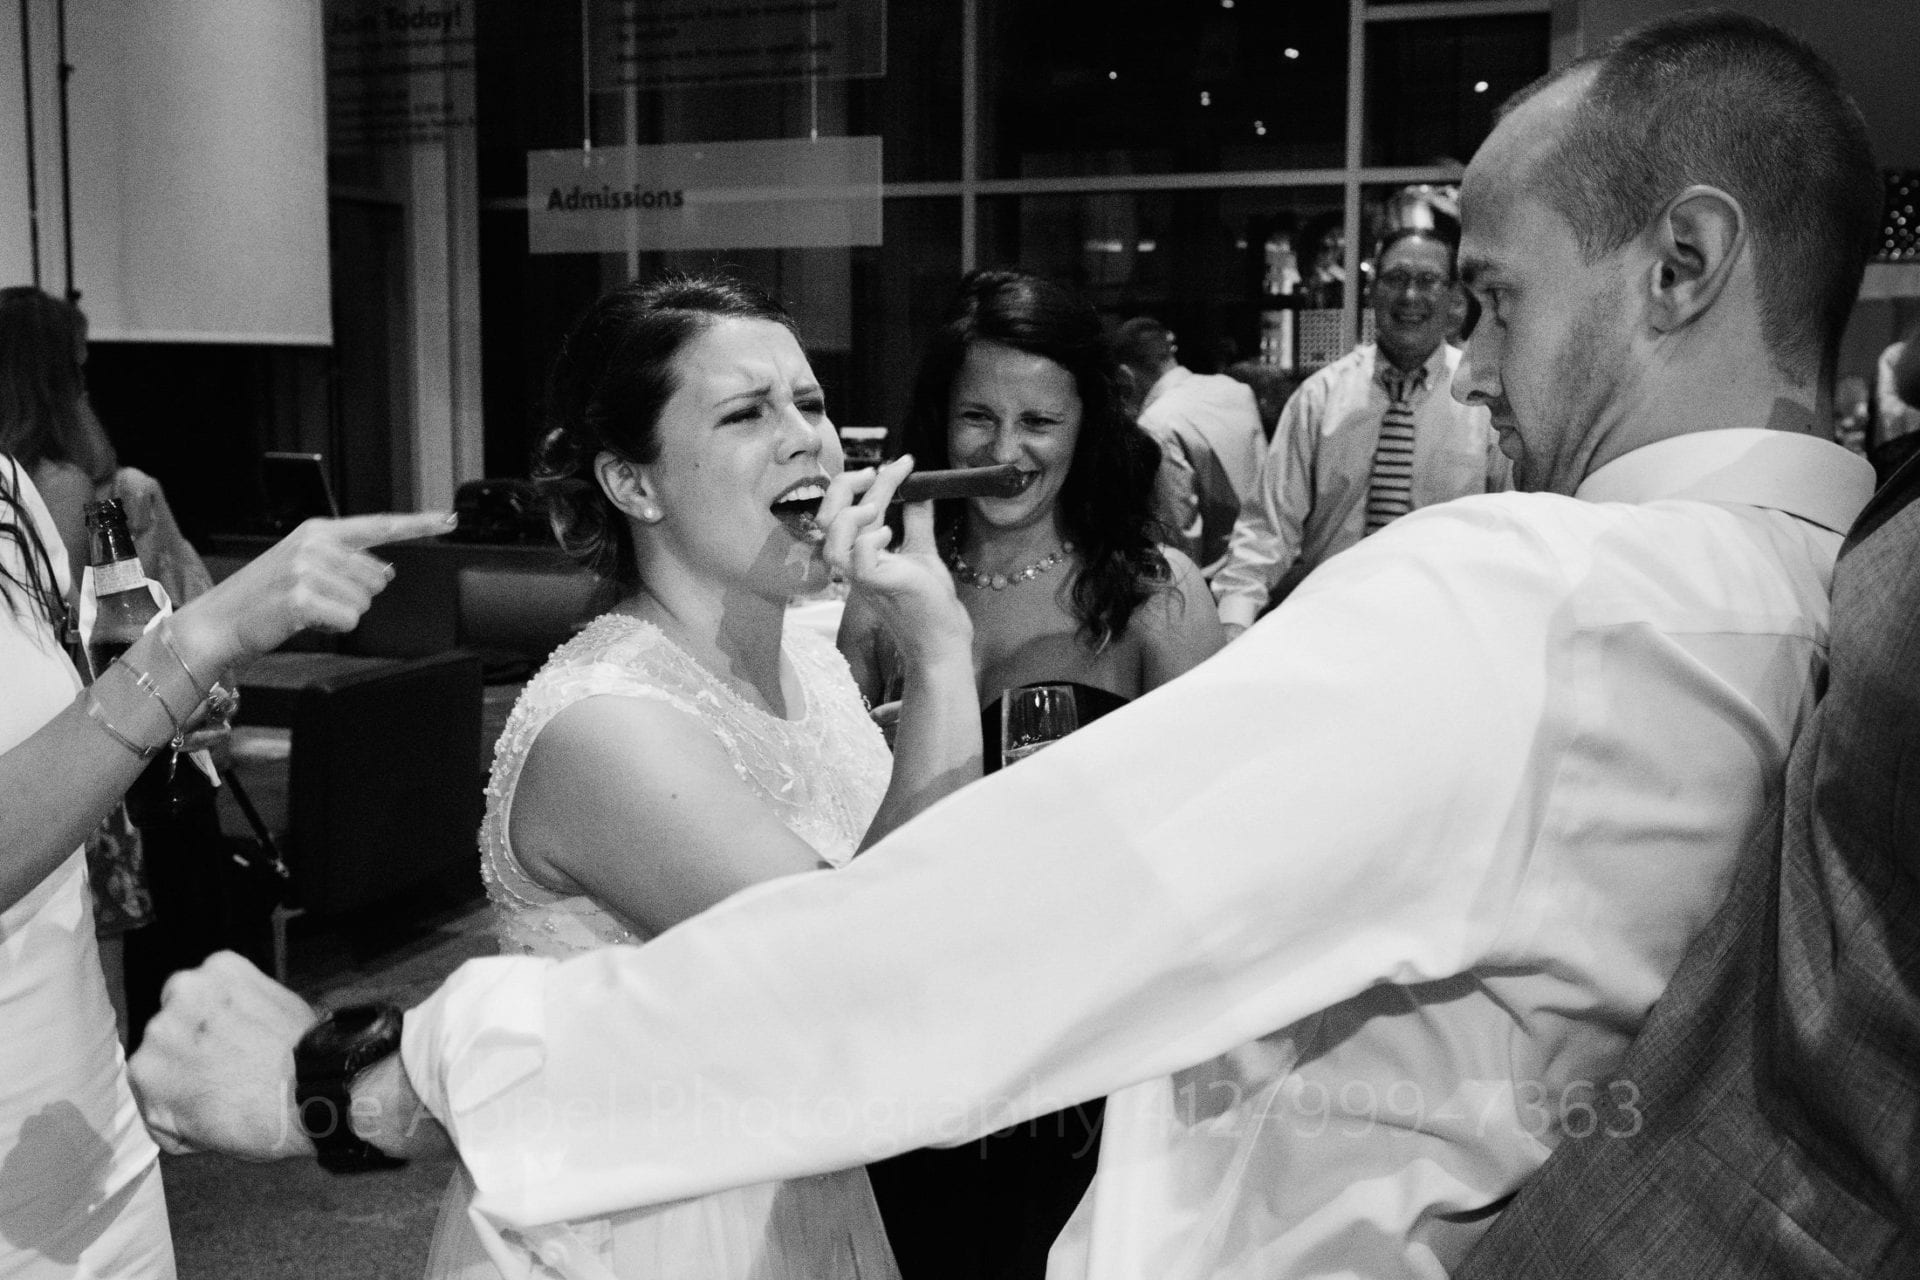 A bride holding a cigar in her mouth dances with a man in a white shirt.